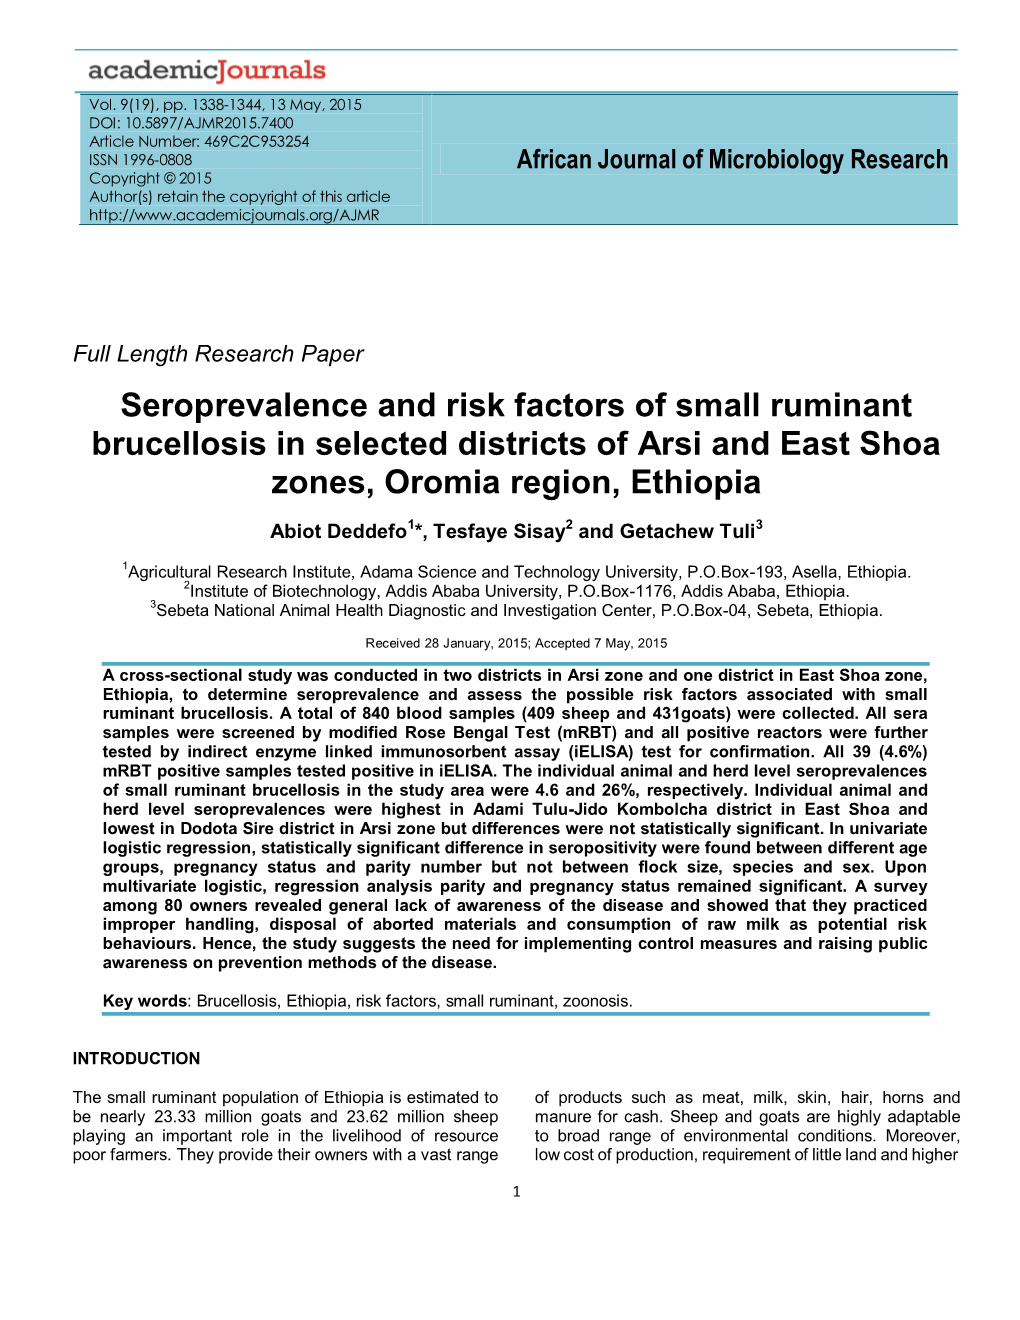 Seroprevalence and Risk Factors of Small Ruminant Brucellosis in Selected Districts of Arsi and East Shoa Zones, Oromia Region, Ethiopia